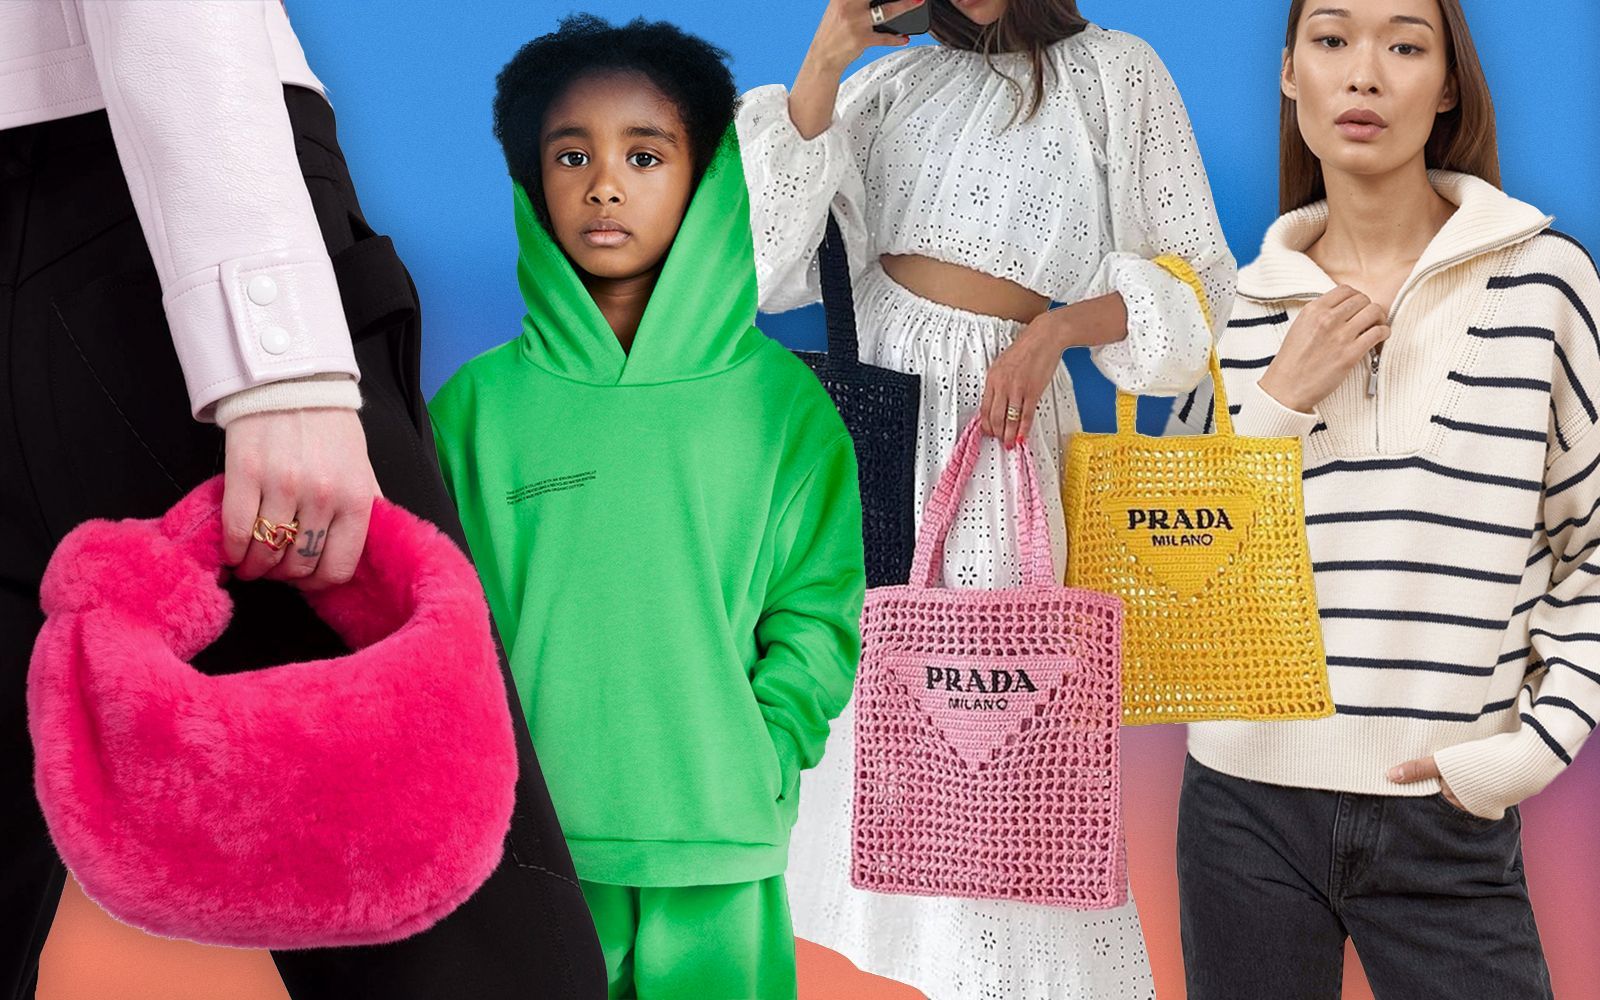 Confimed: literally every fashion girl owns this Prada bag in 2020